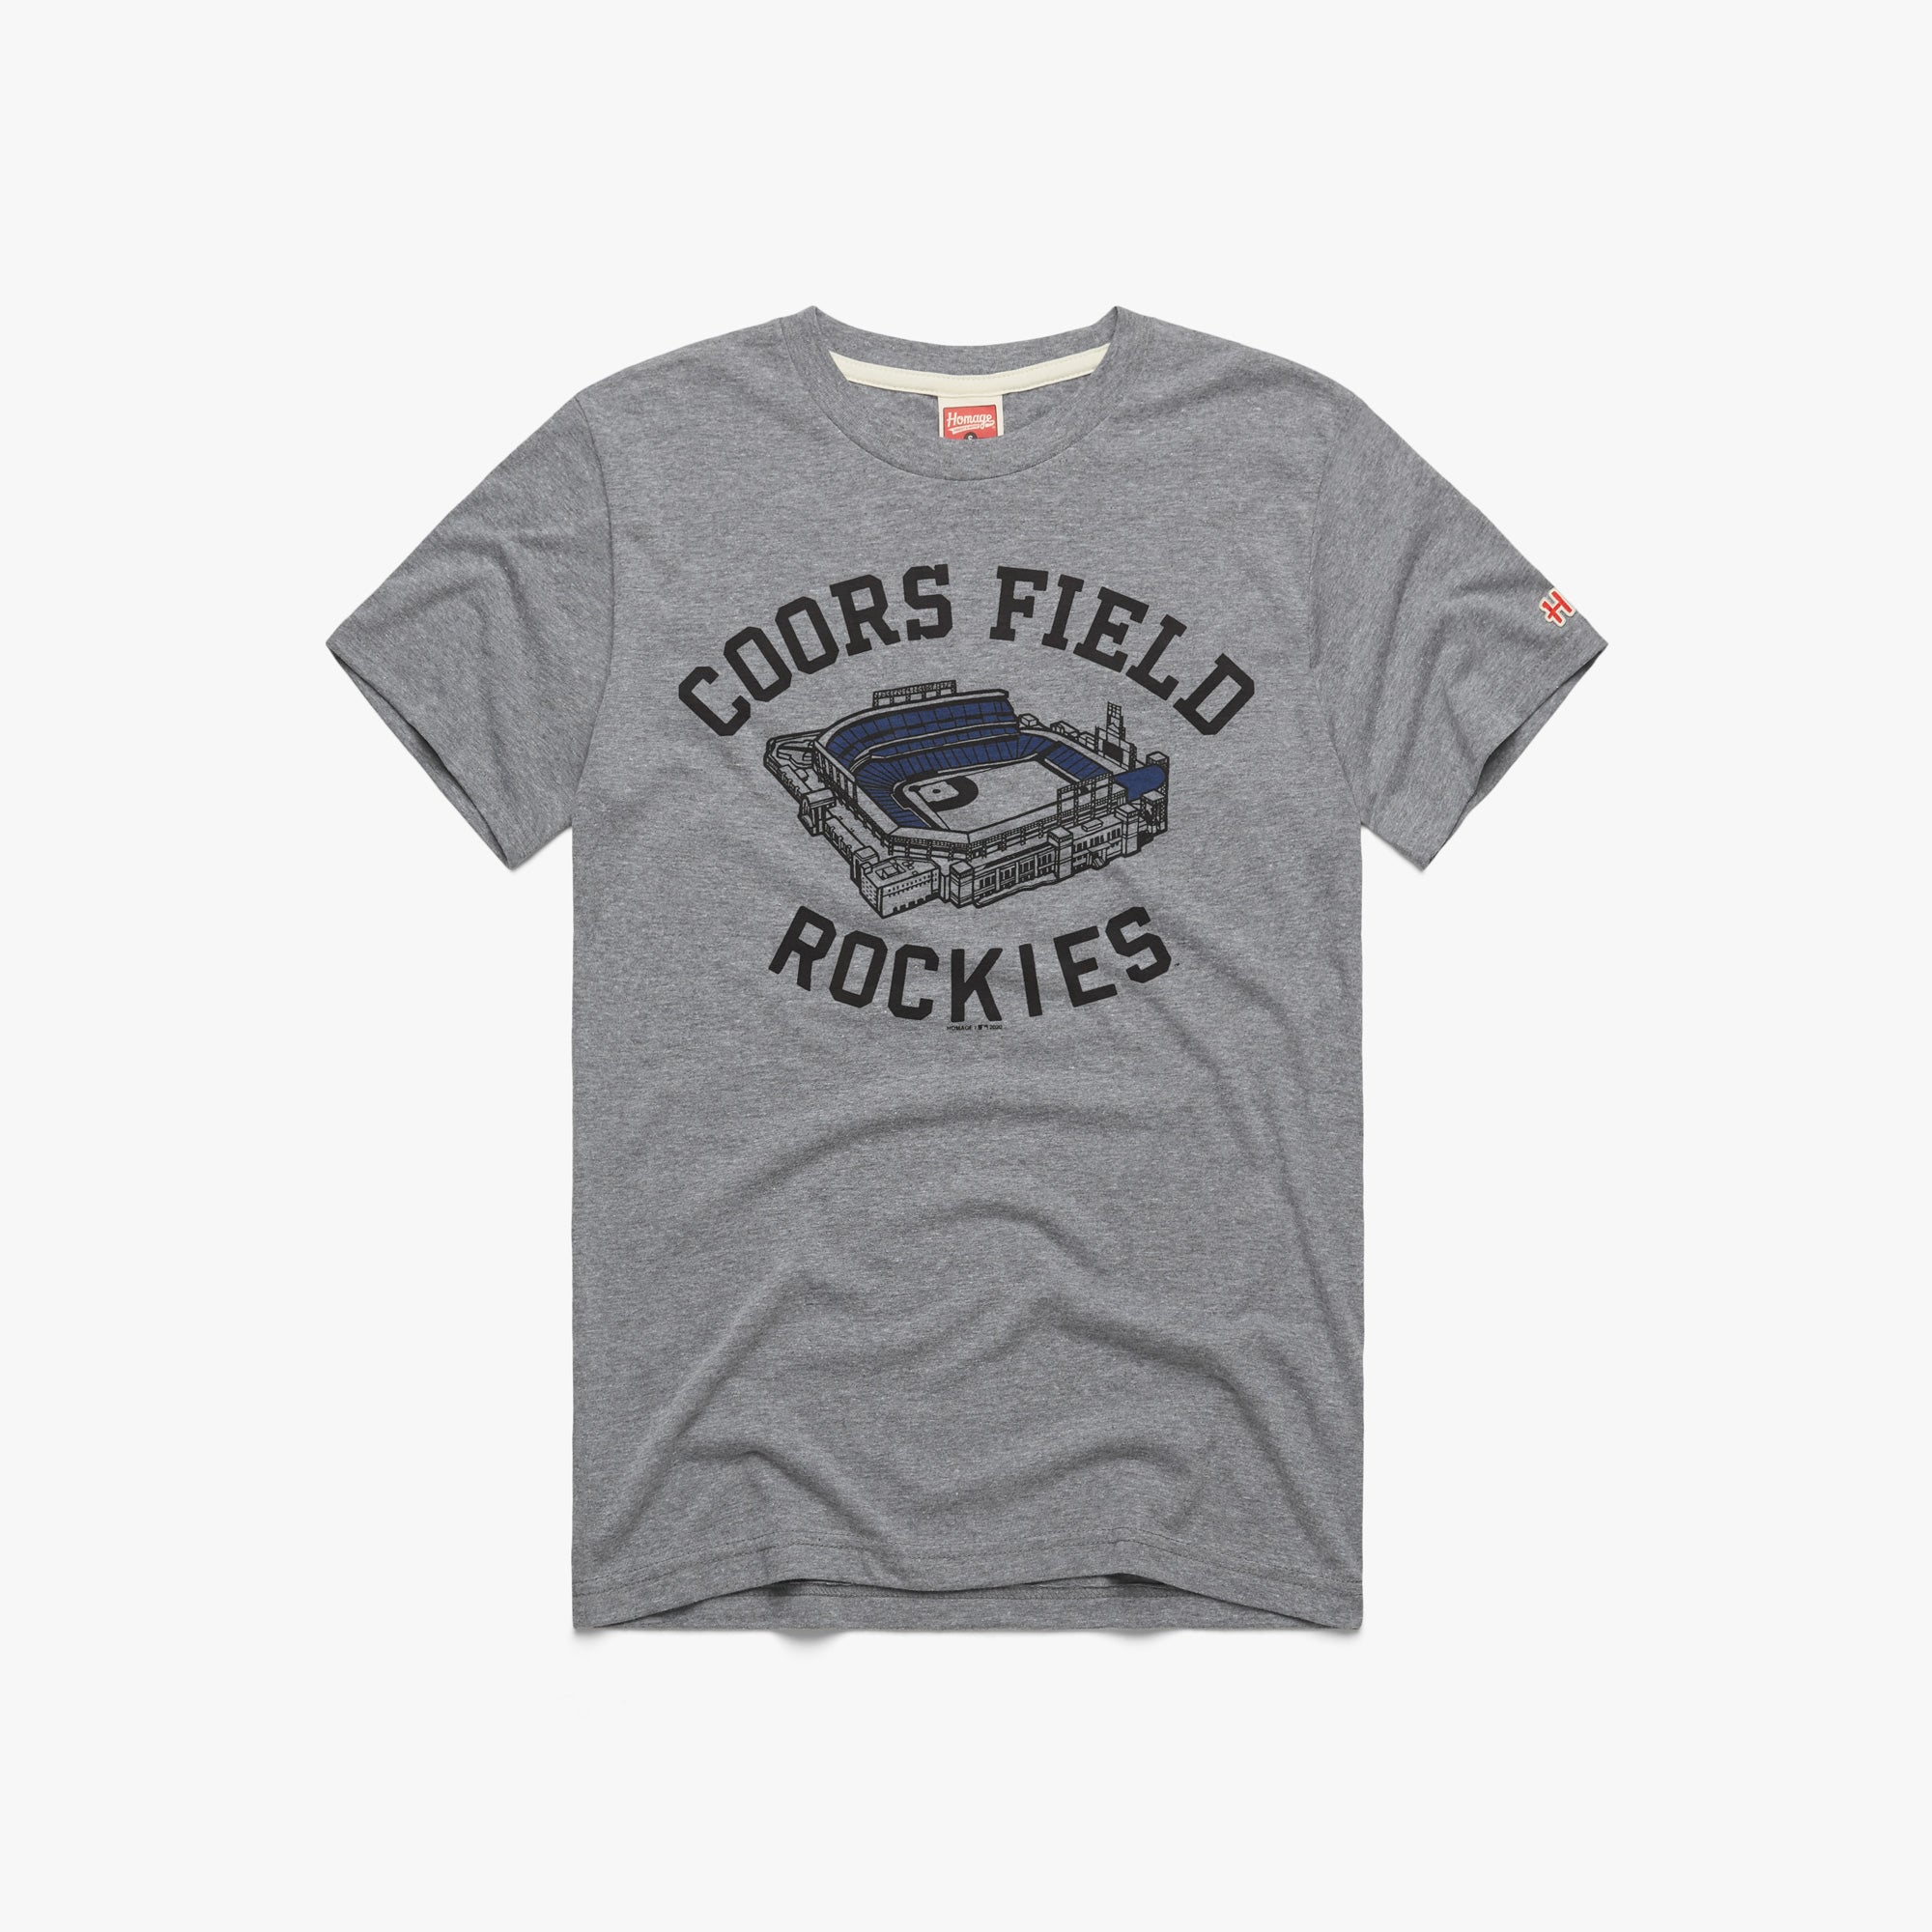 Coors Field Rockies T-Shirt from Homage. | Grey | Vintage Apparel from Homage.